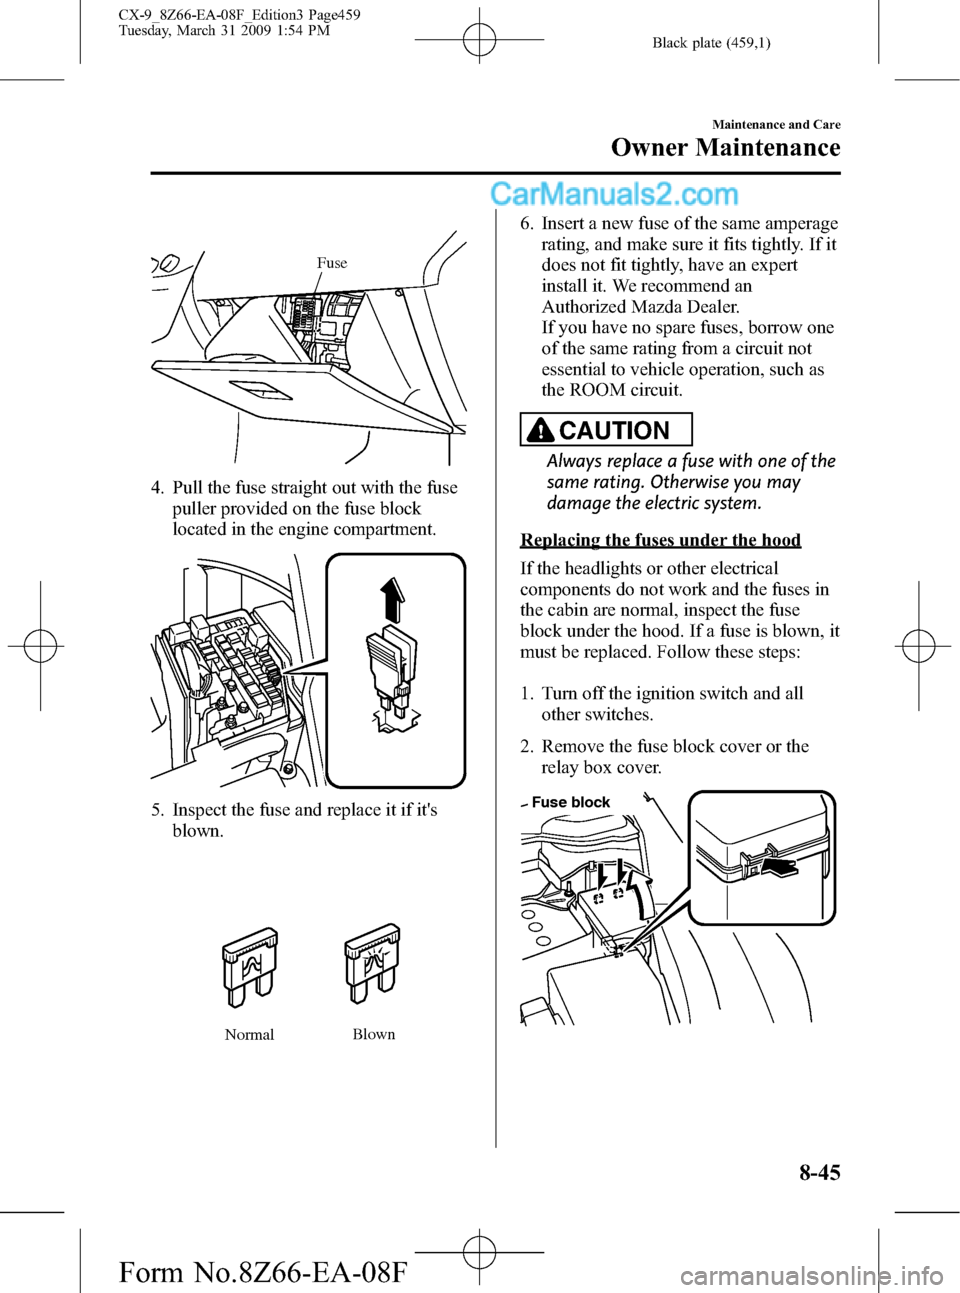 MAZDA MODEL CX-9 2009  Owners Manual (in English) Black plate (459,1)
Fuse
4. Pull the fuse straight out with the fuse
puller provided on the fuse block
located in the engine compartment.
5. Inspect the fuse and replace it if its
blown.
NormalBlown
